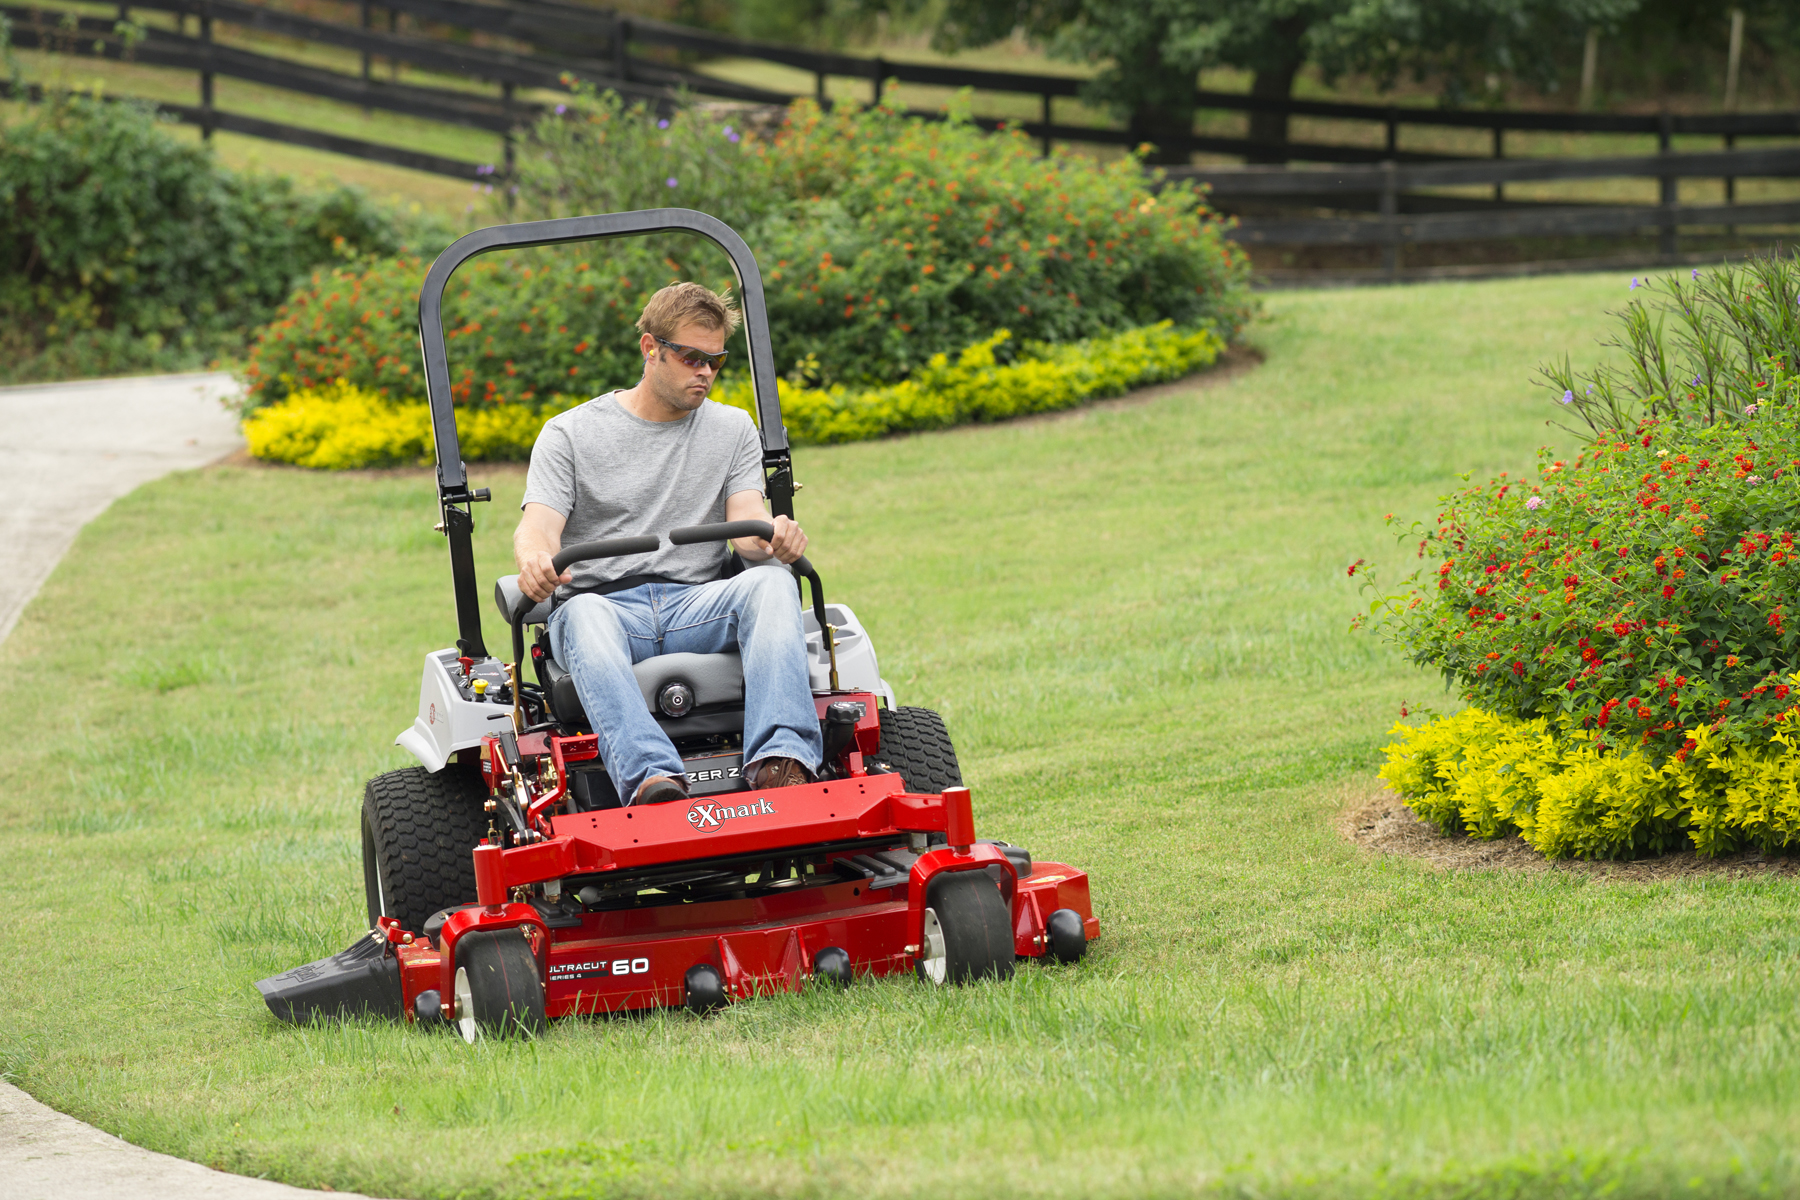 How to Maneuver a Zero Turn Mower Like a Pro.